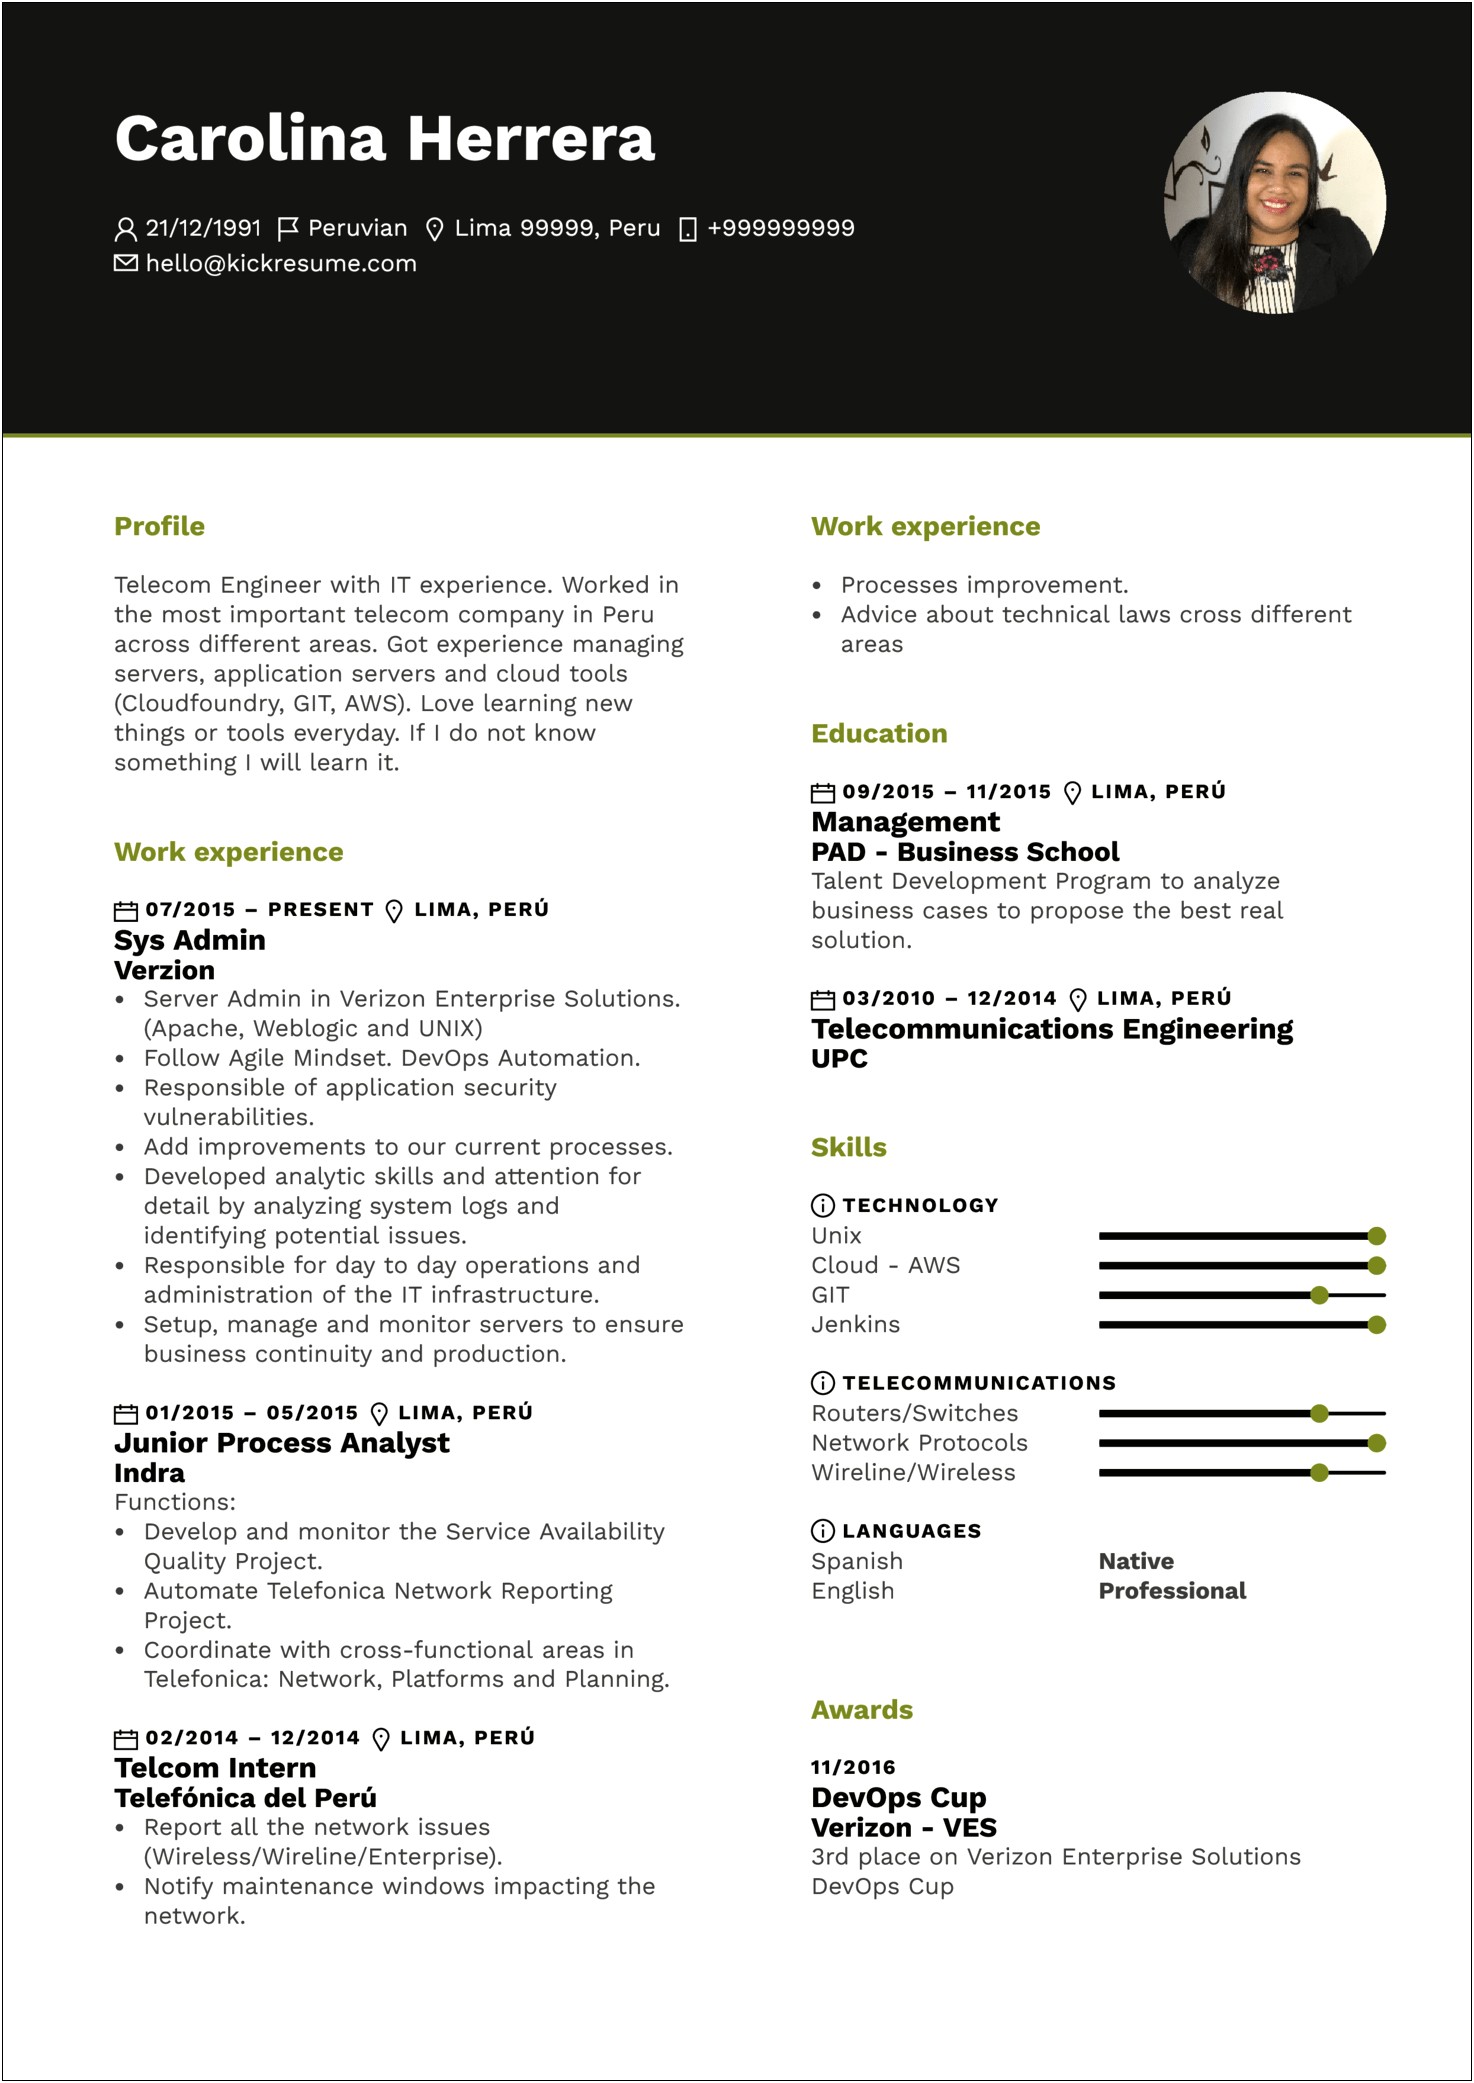 Sample Resume Profiles For Administrative And Research Analyst